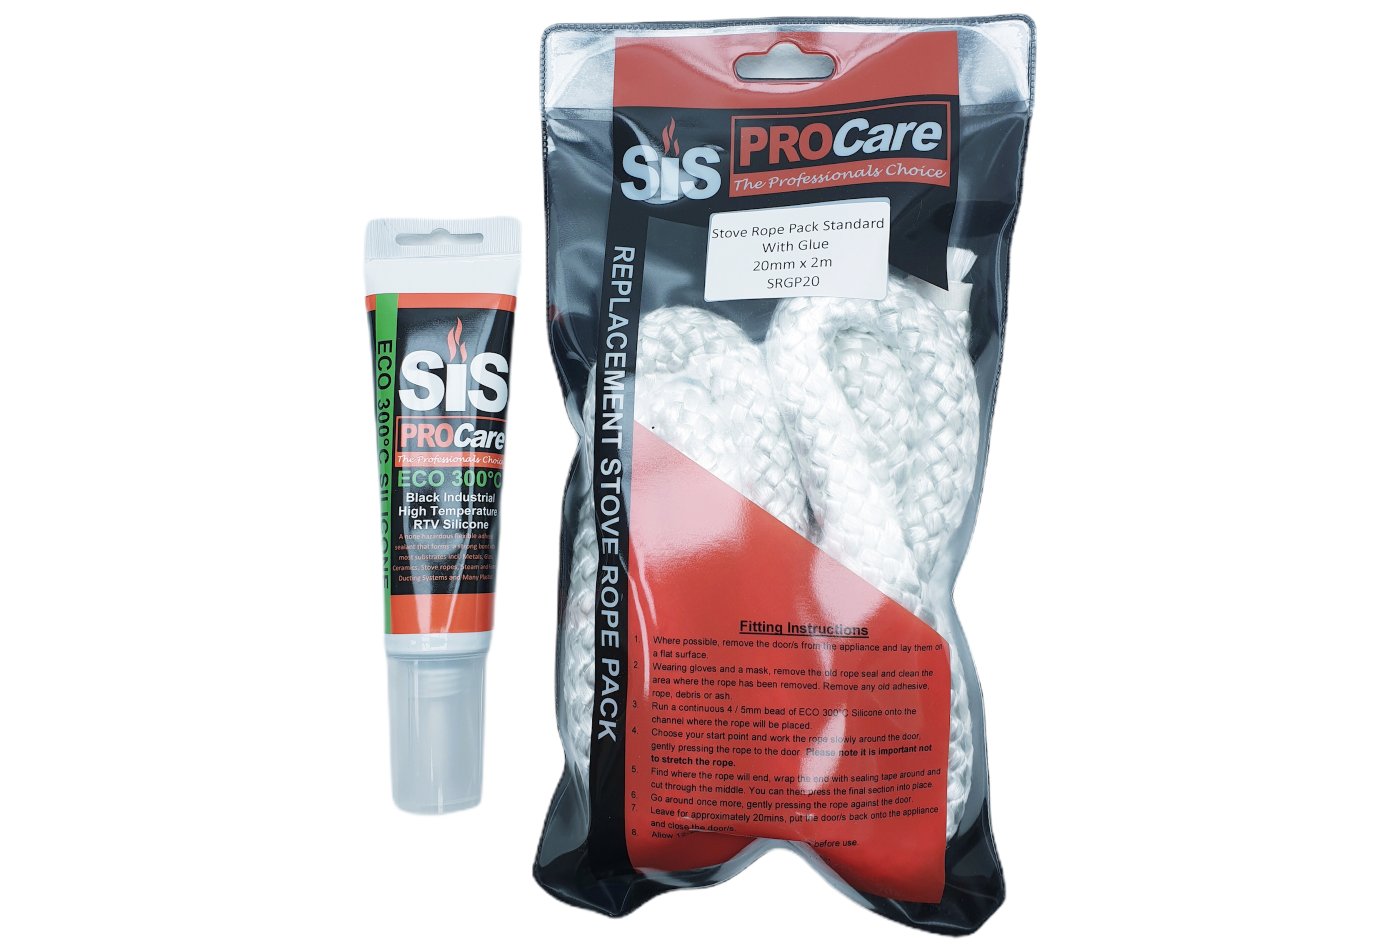 SiS Procare White 20 milimetre x 2 metre Standard Stove Rope & 80 millilitre Rope Glue Pack - product code SRGP20